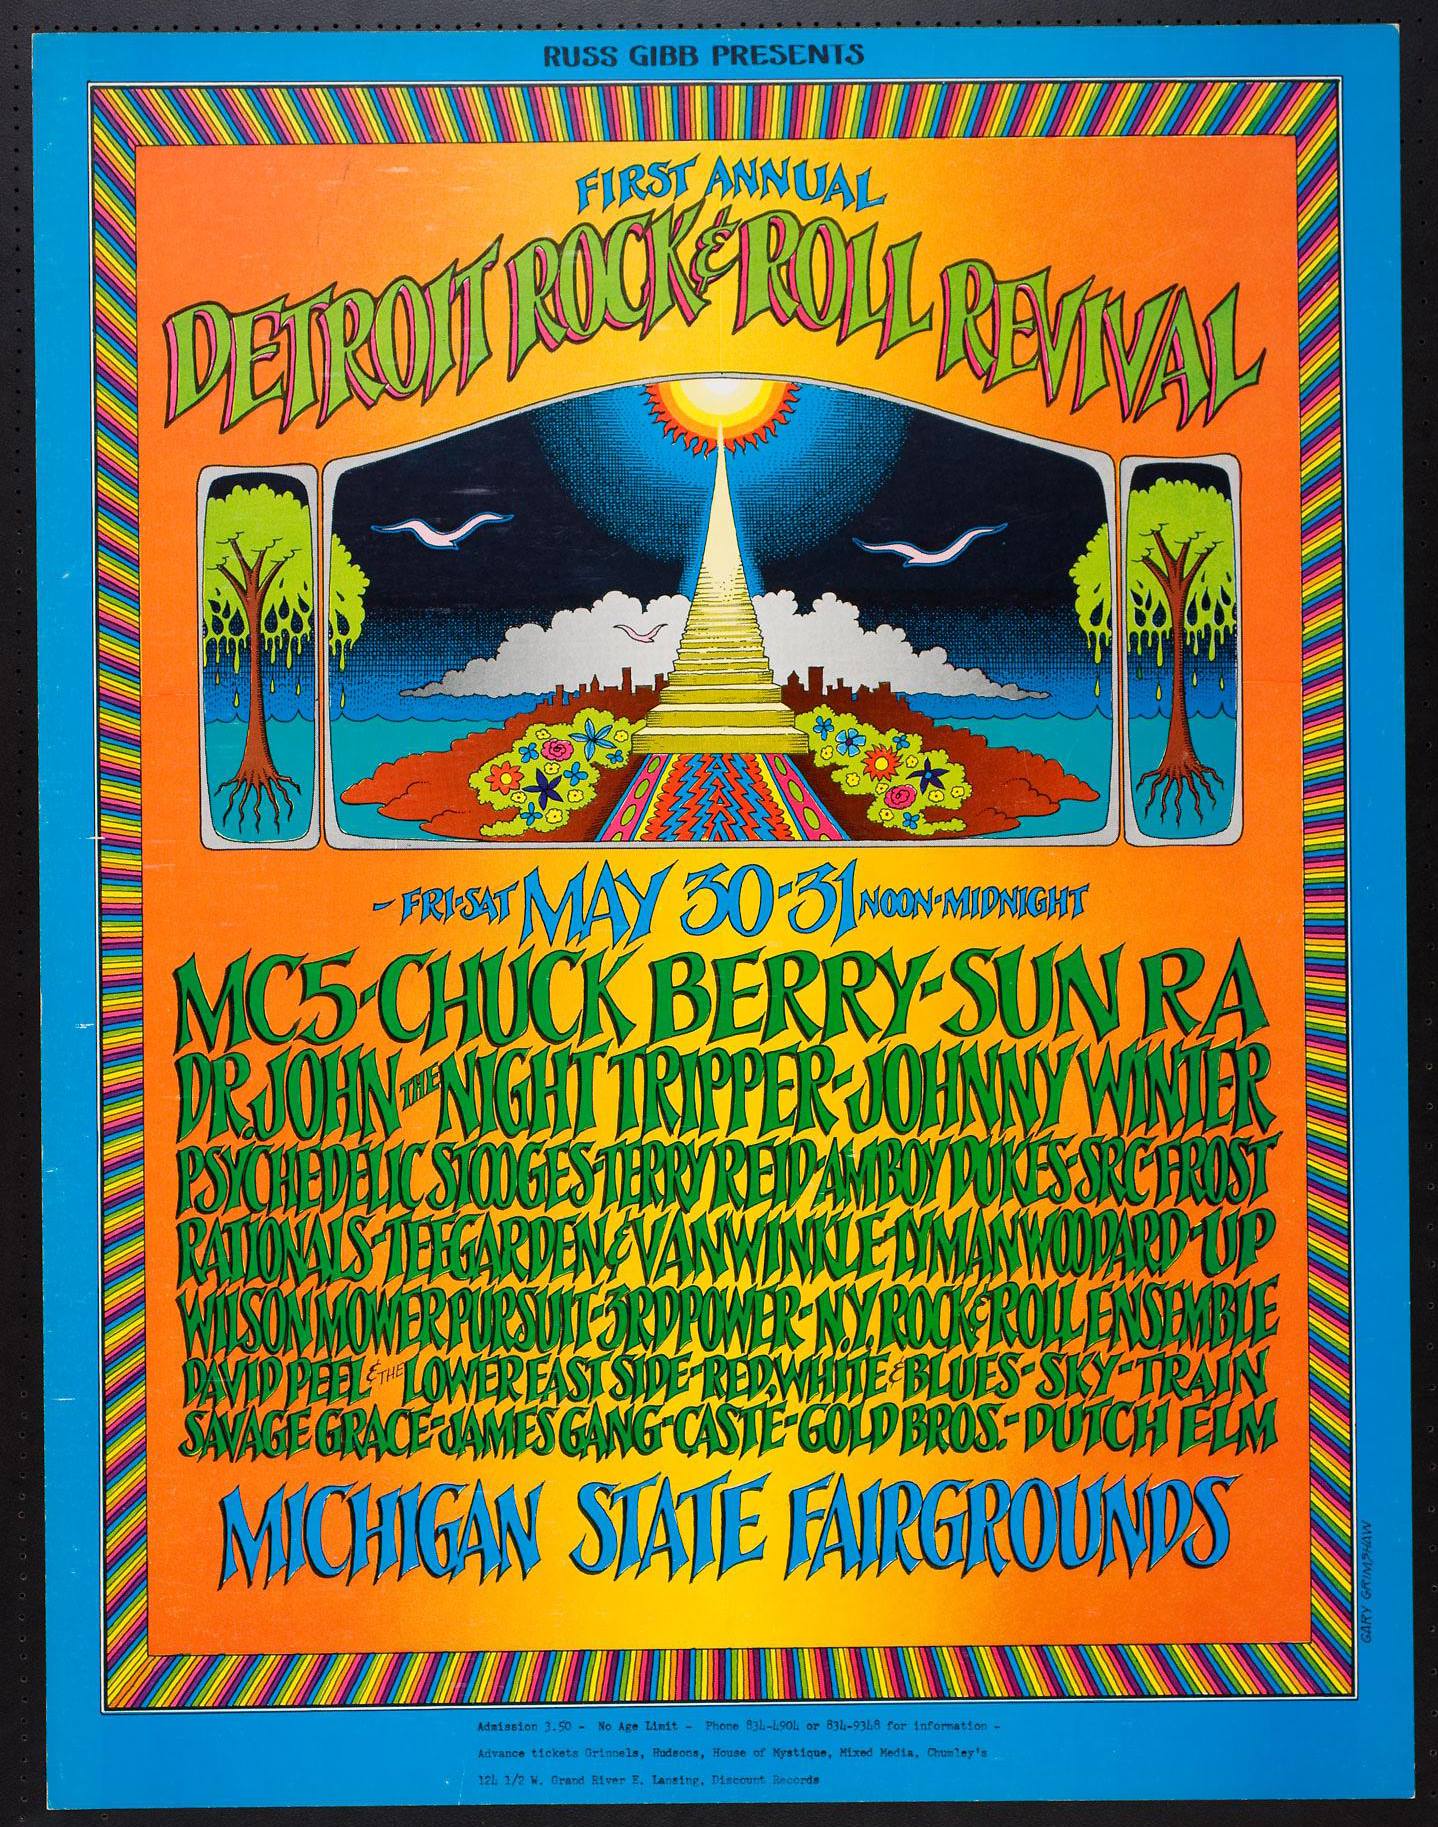 The First Annual Detroit Rock & Roll Revival, Detroit, Michigan State Fairgrounds May 30-31, 1969